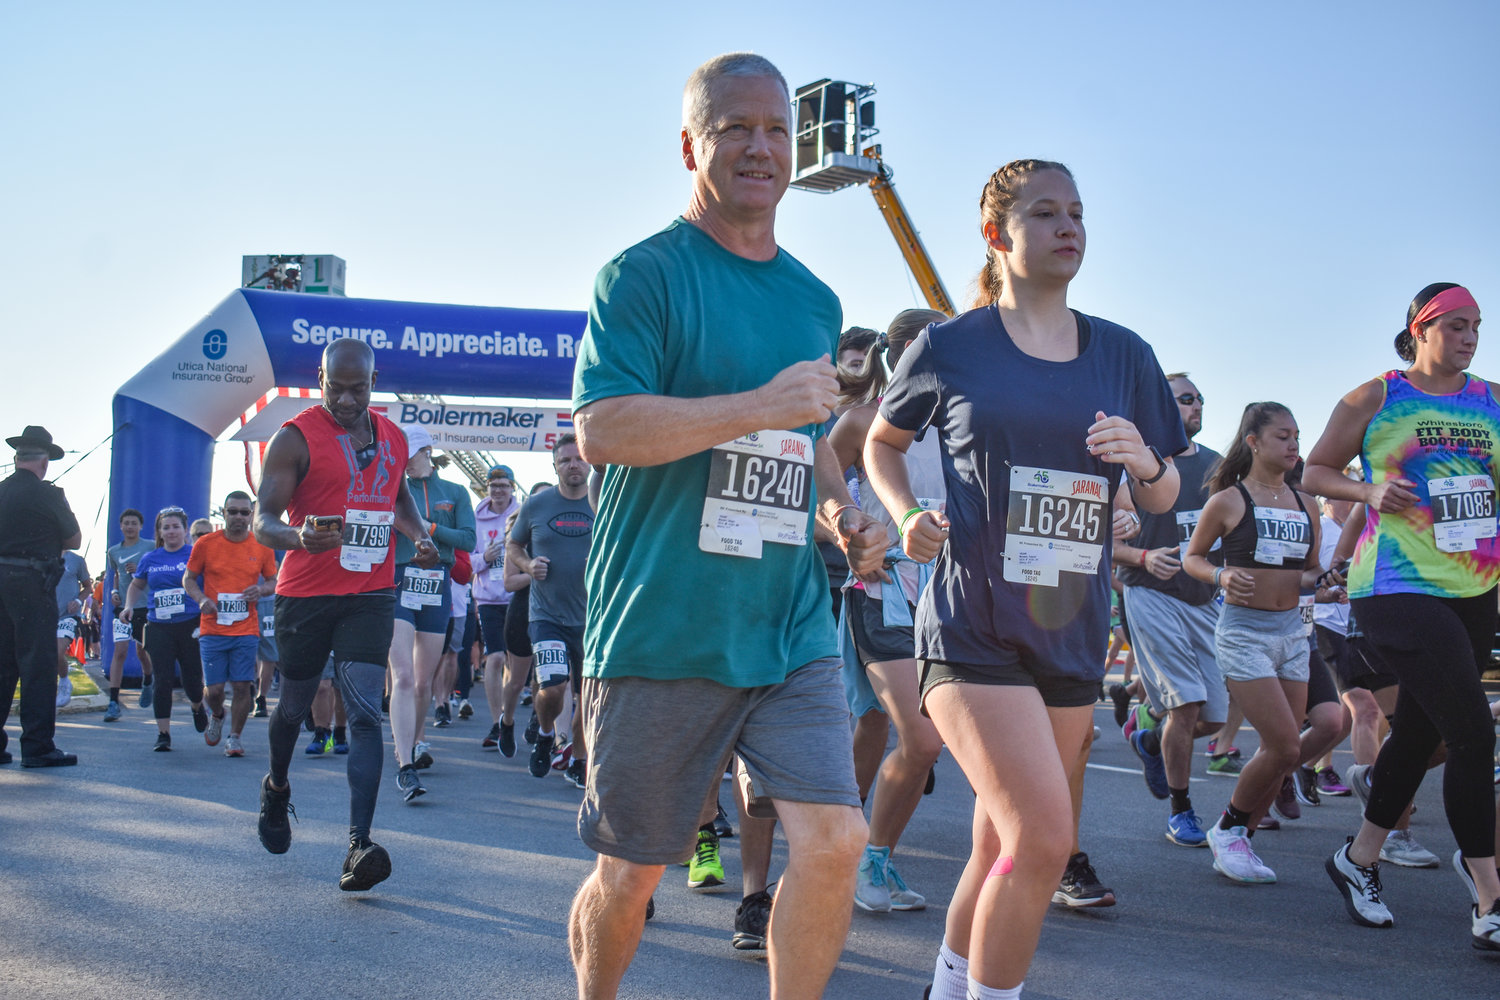 Thousands of competitors took off from the starting line on Burrstone Road bridge for the 2022 Boilermaker 5K on Sunday, July 10.